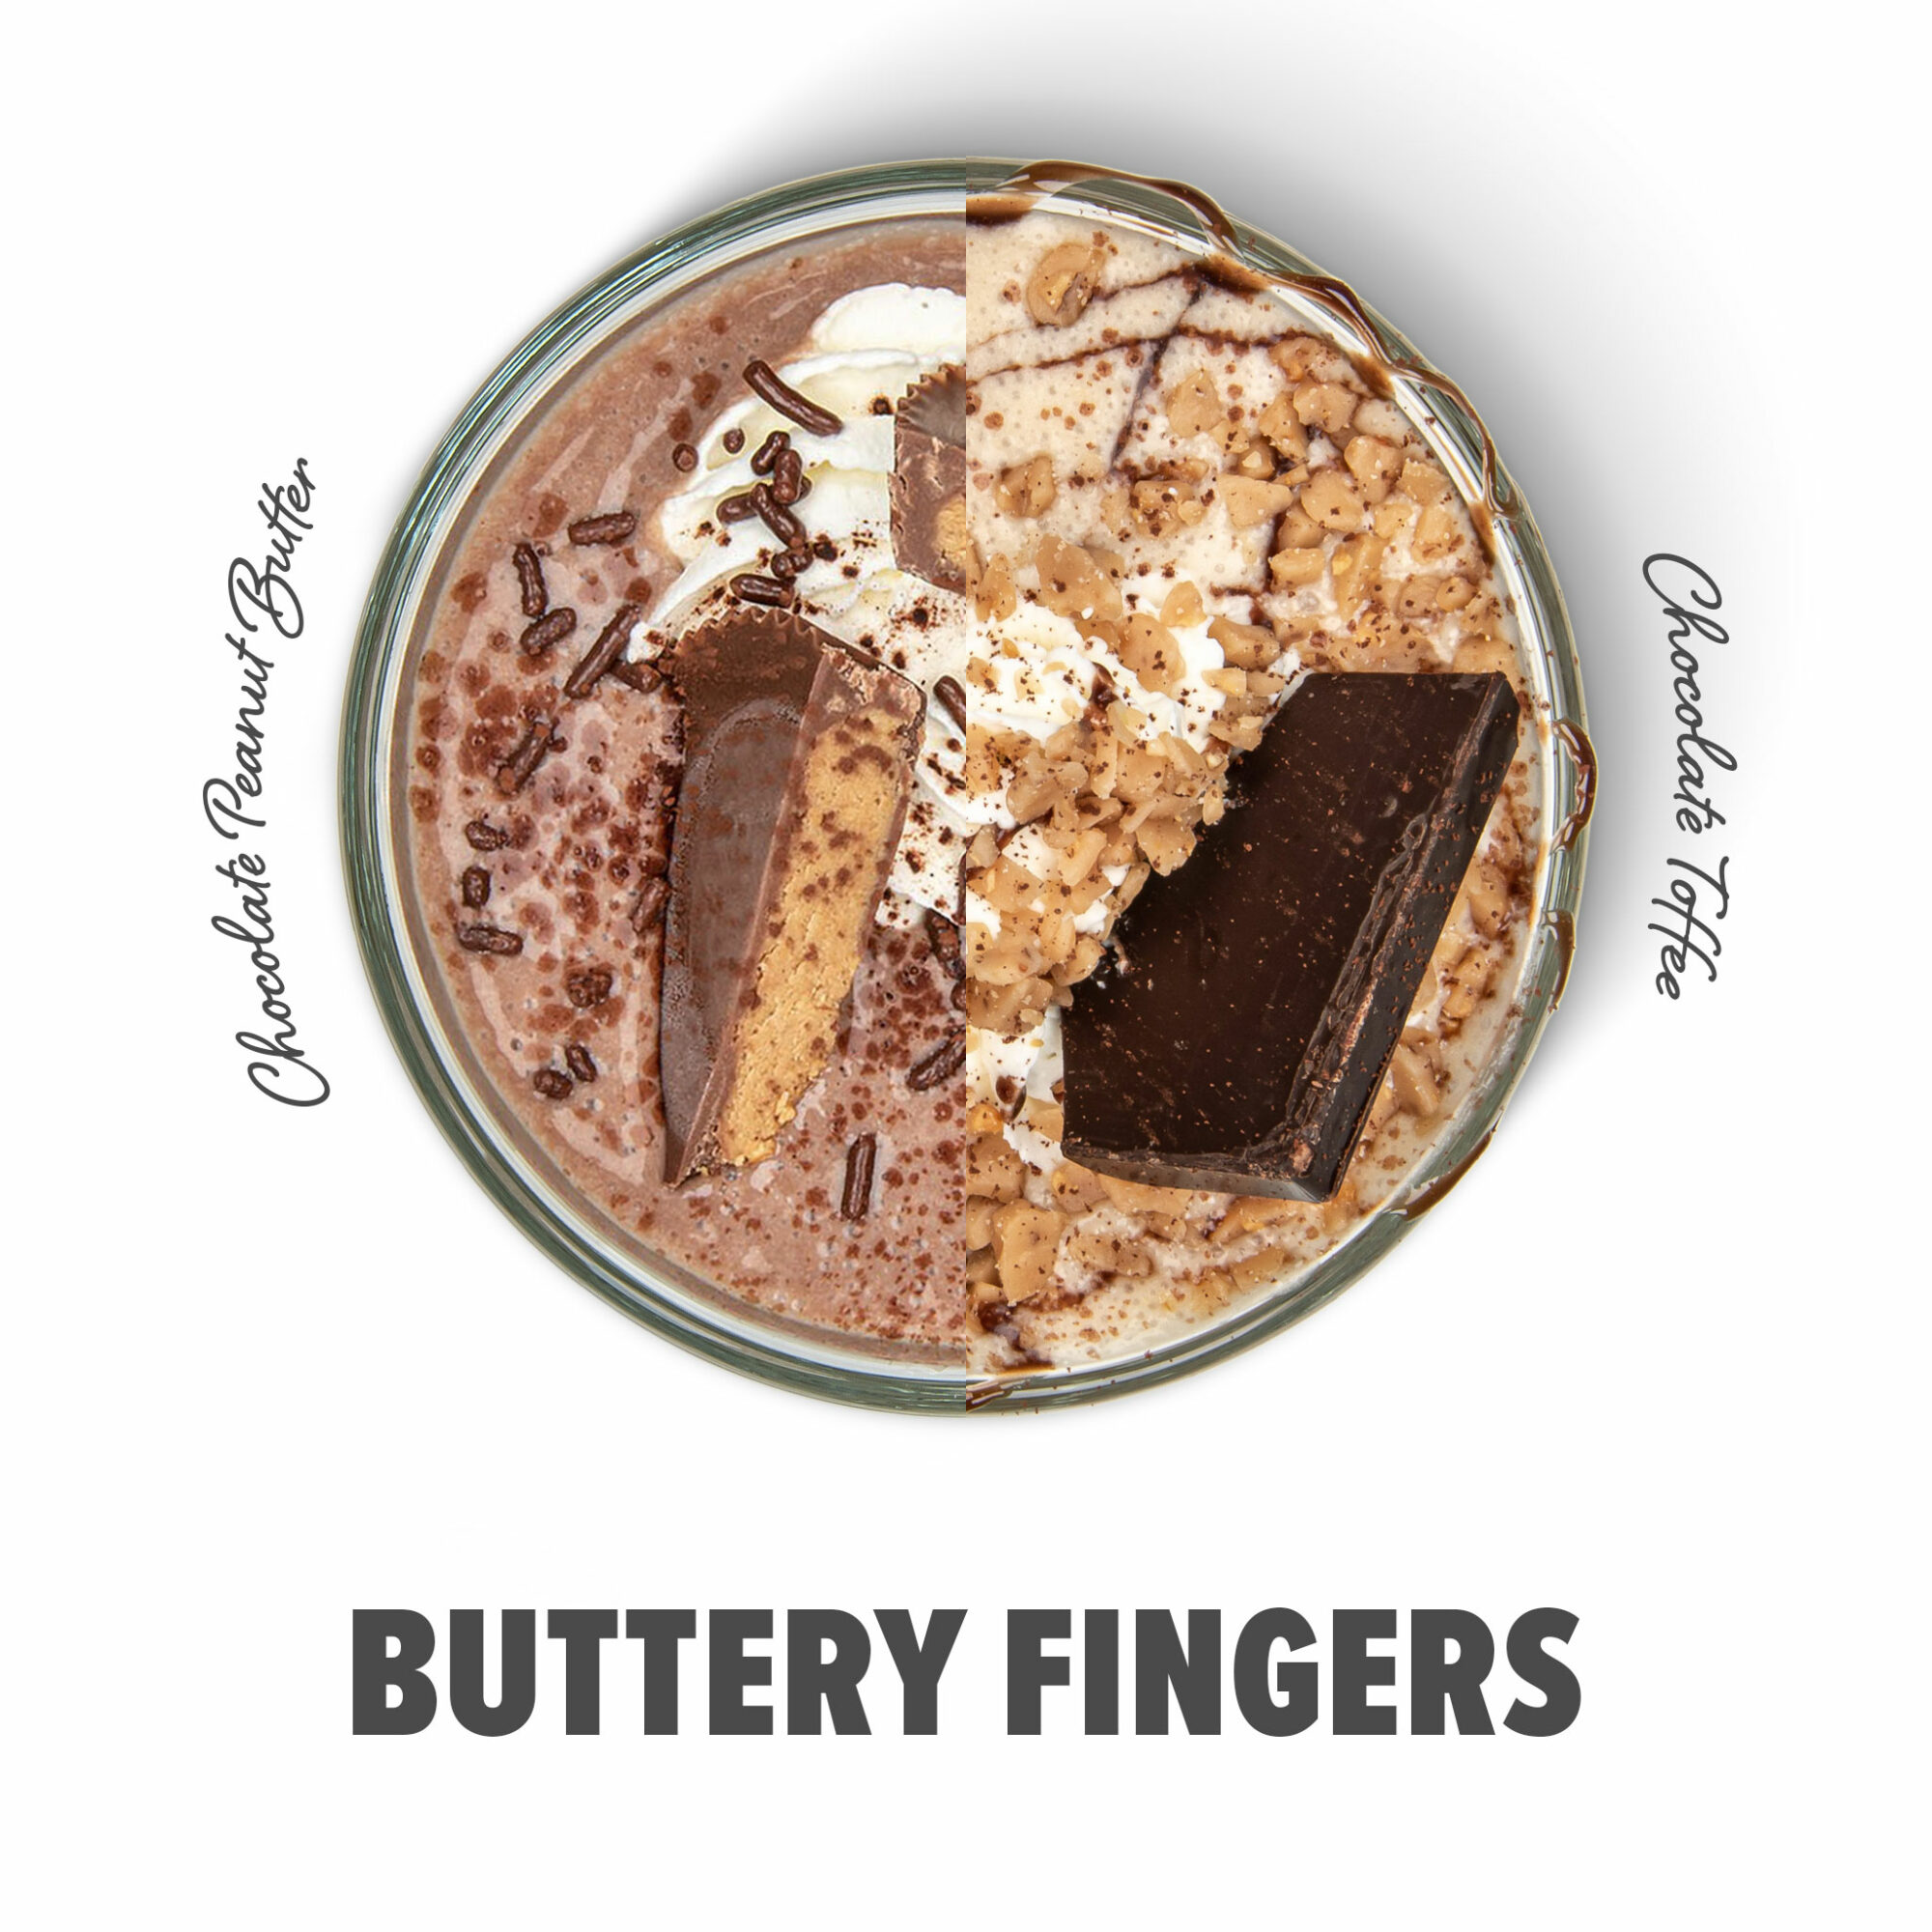 Buttery Fingers shake image